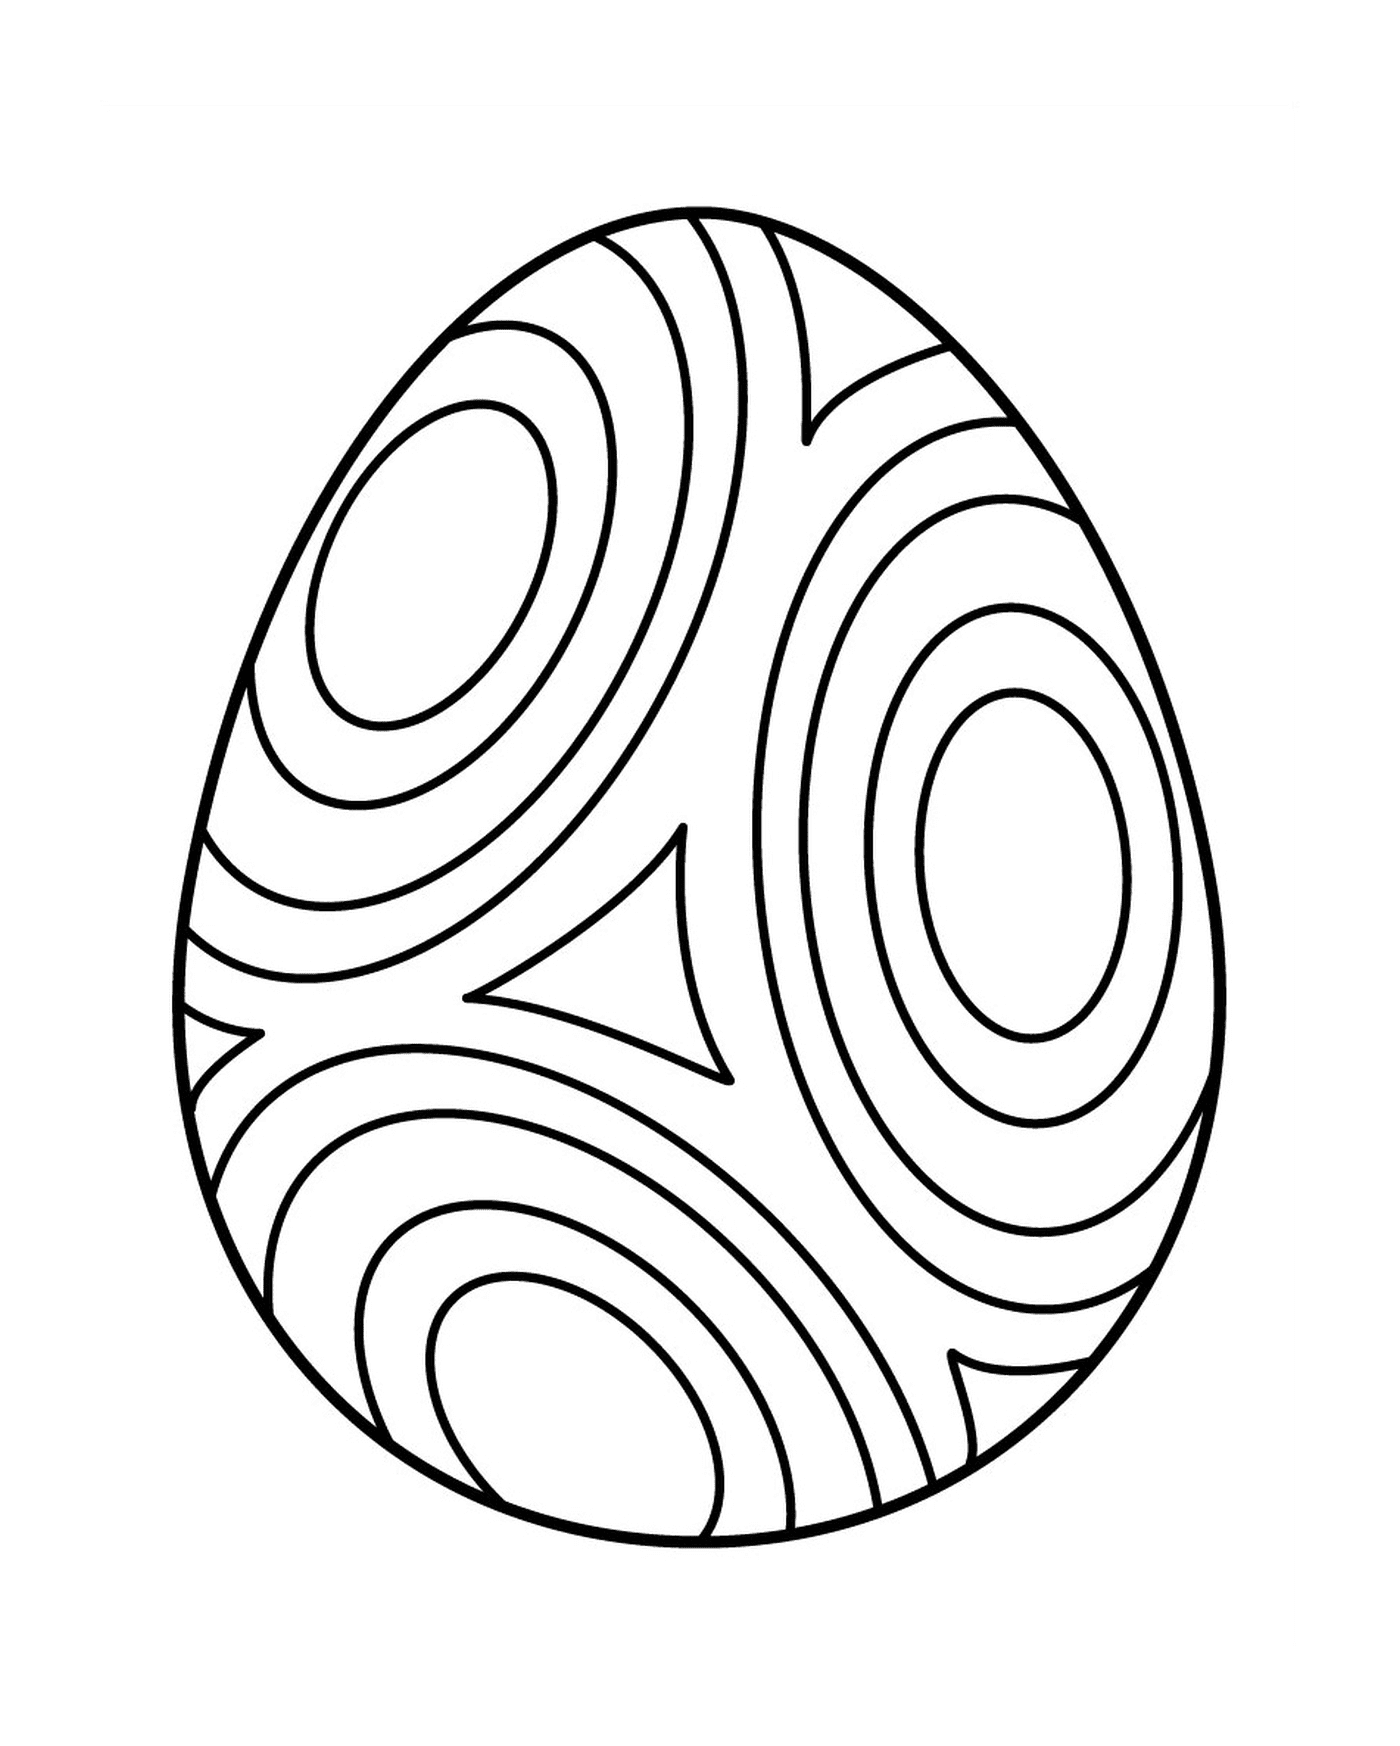  Easter egg with circle, a colorful egg 